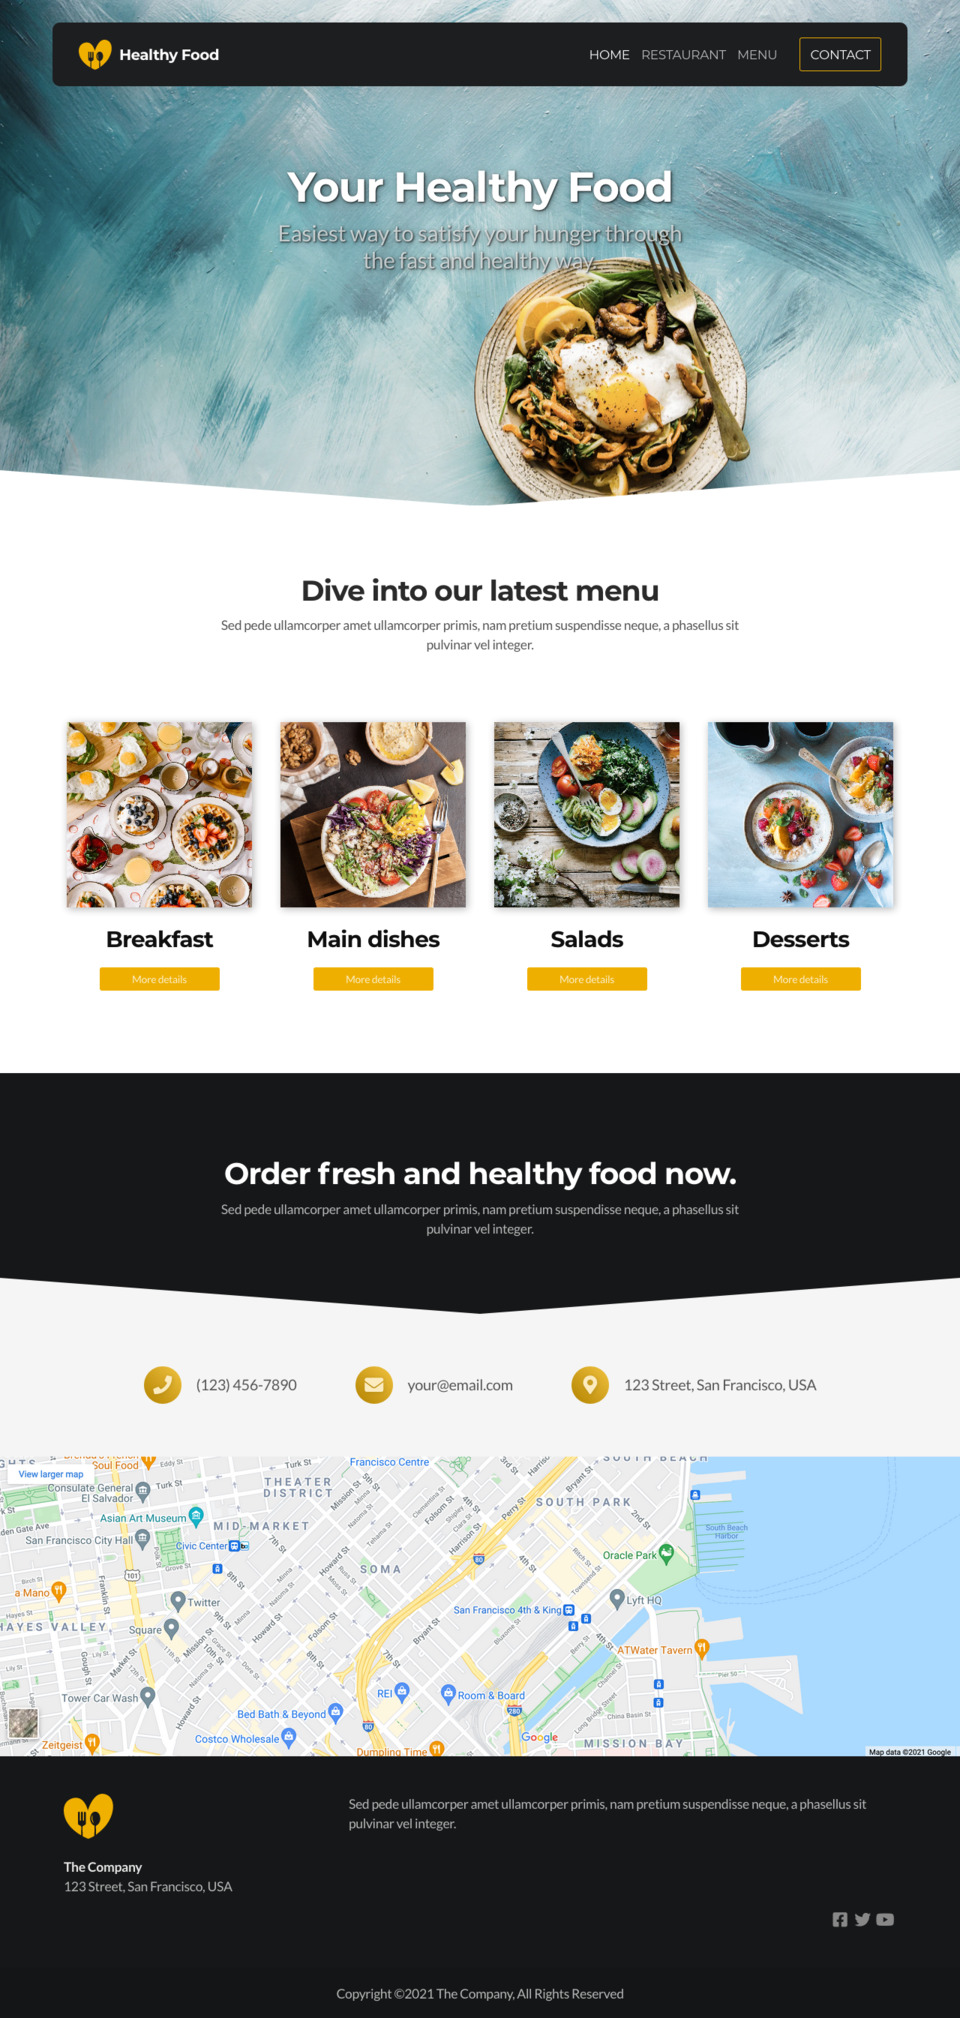 Healthy Food Website Template - Ideal for restaurants, cafes, diners, food blogs, small eateries, and any business in the food industry.